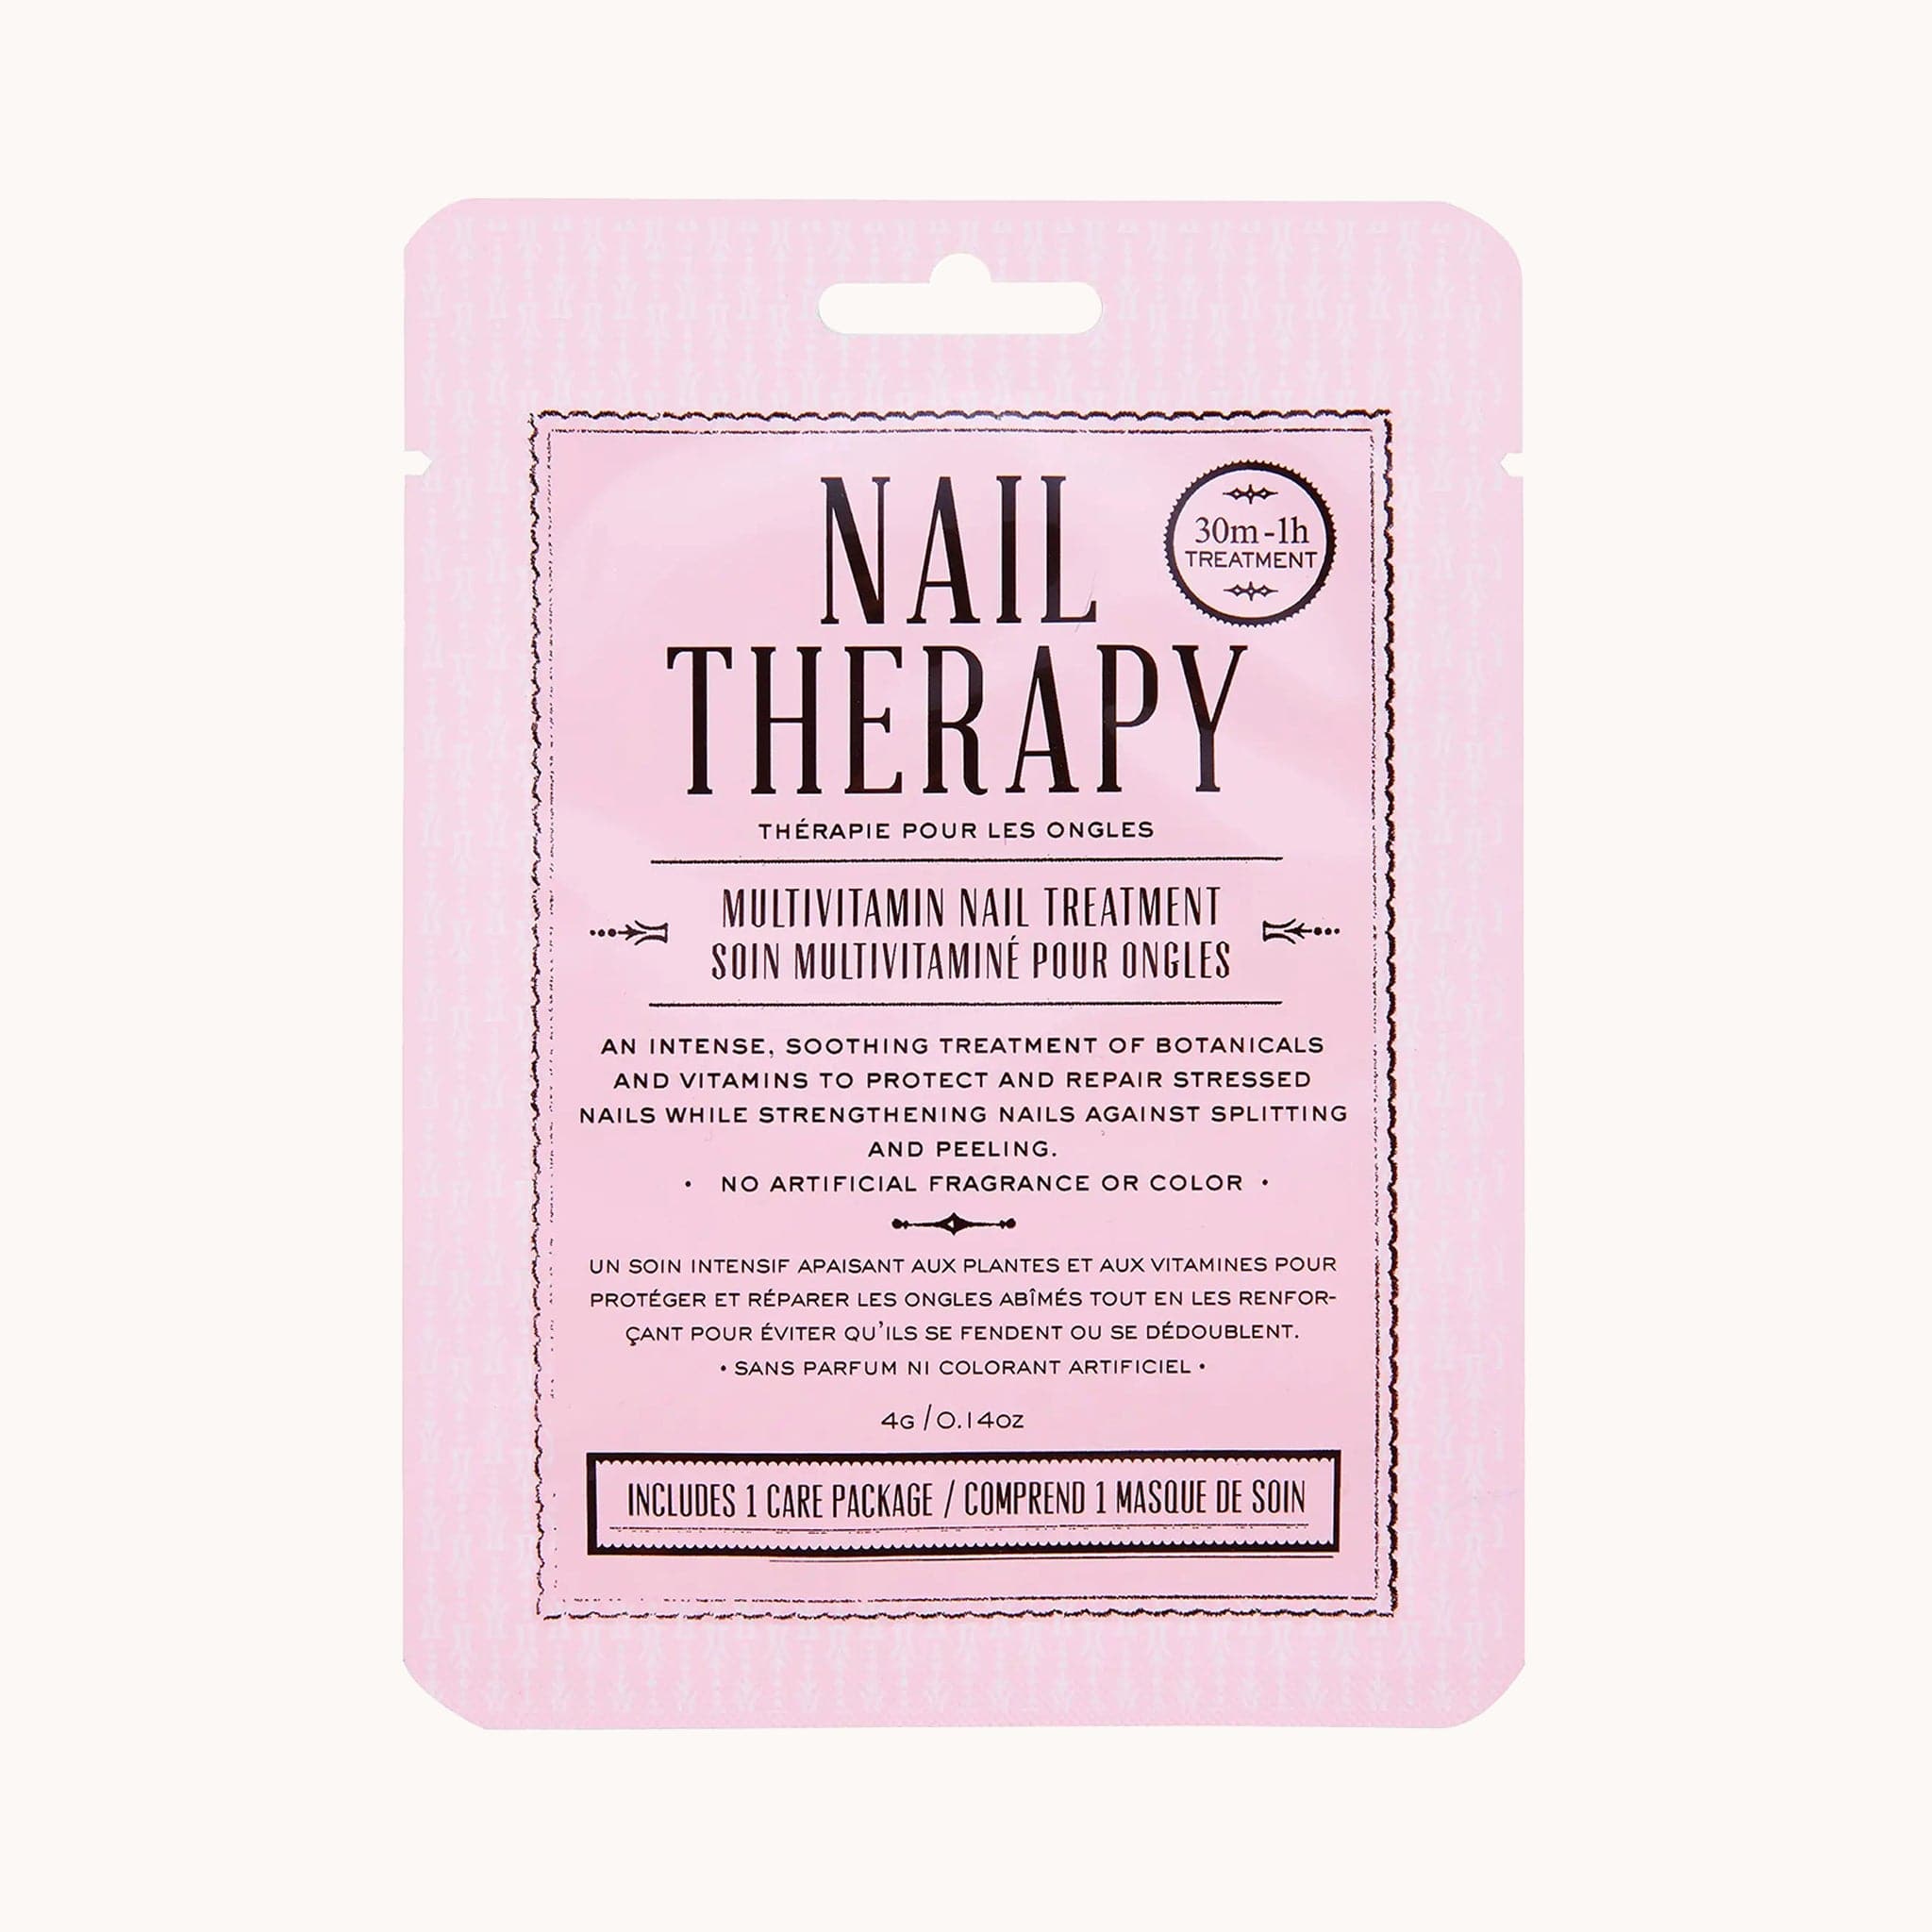 On a white background is a pink packet of nail treatment with black text on the front that reads, "Nail Therapy Multivitamin Nail Treatment". 